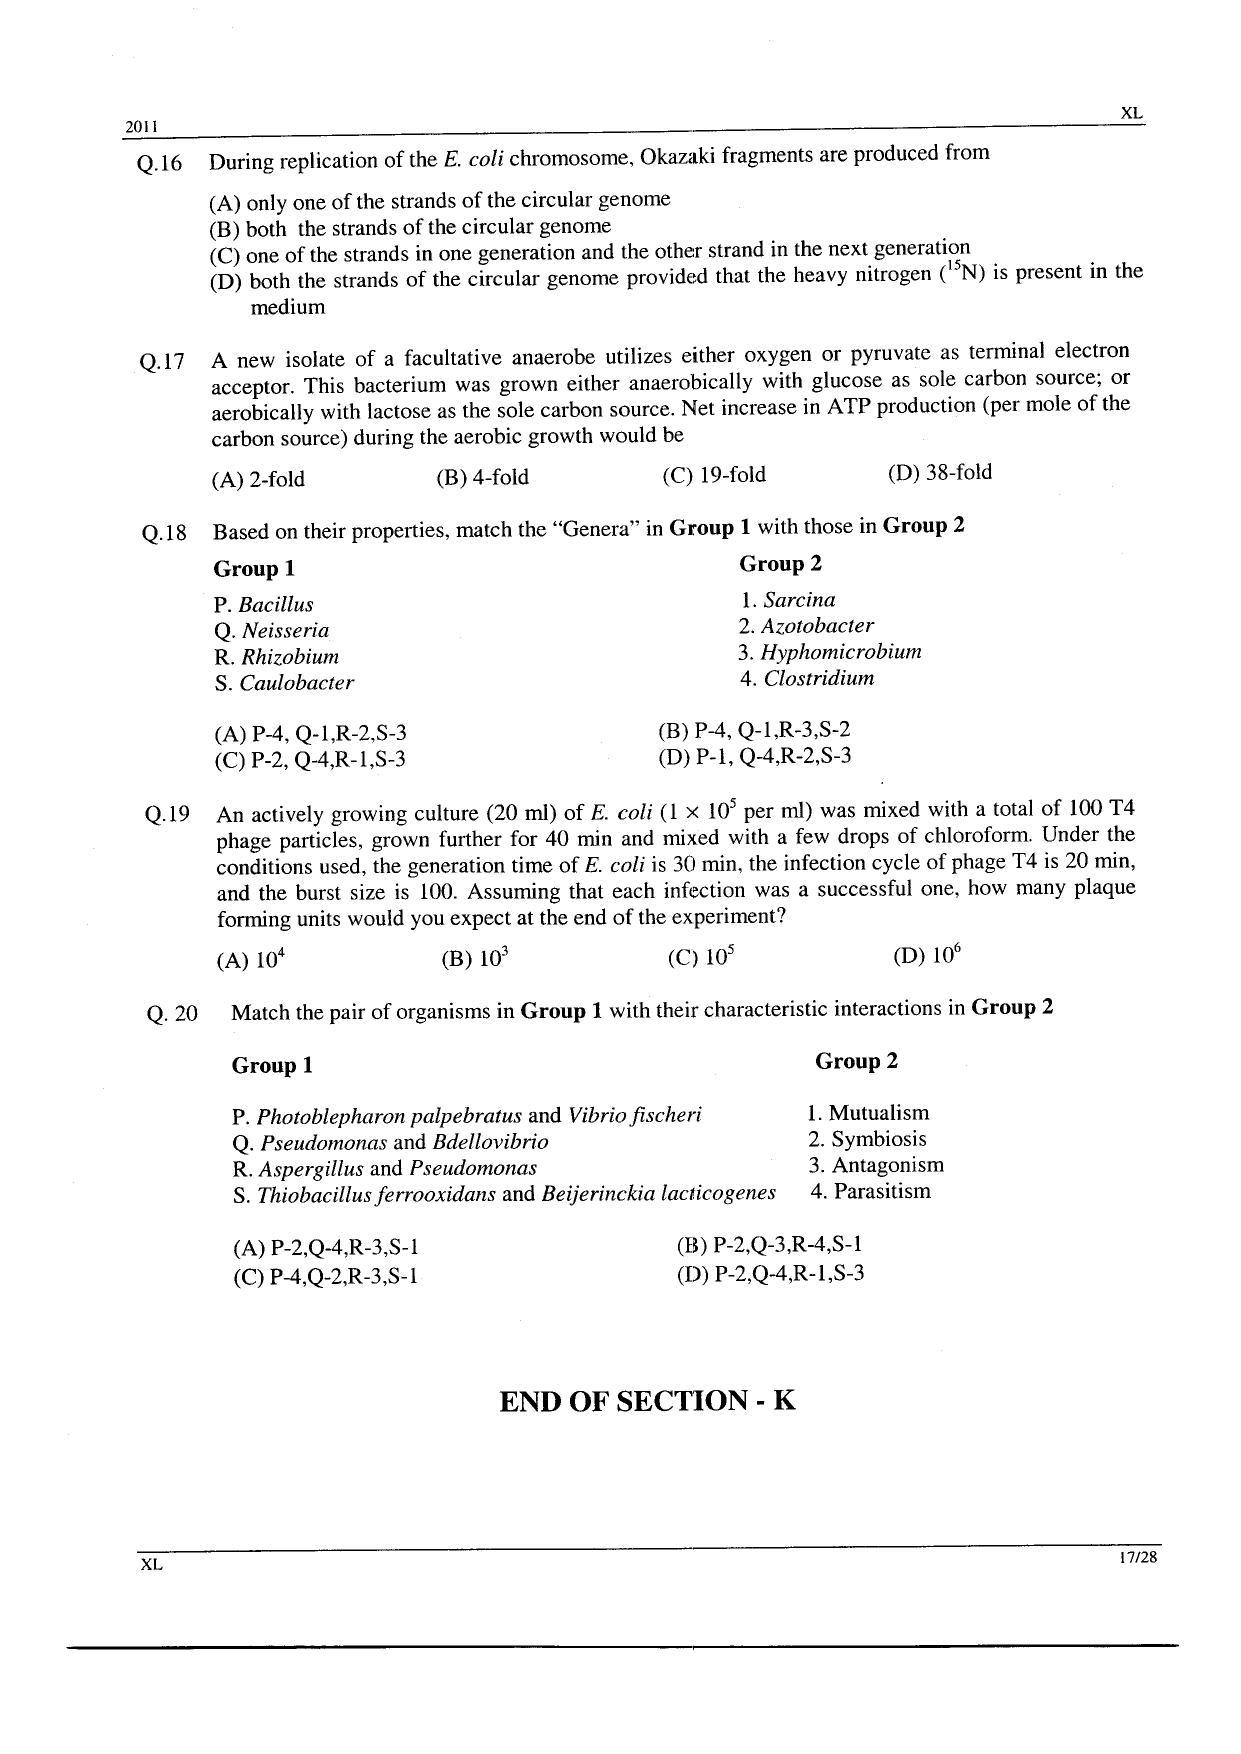 GATE 2011 Life Sciences (XL) Question Paper with Answer Key - Page 17